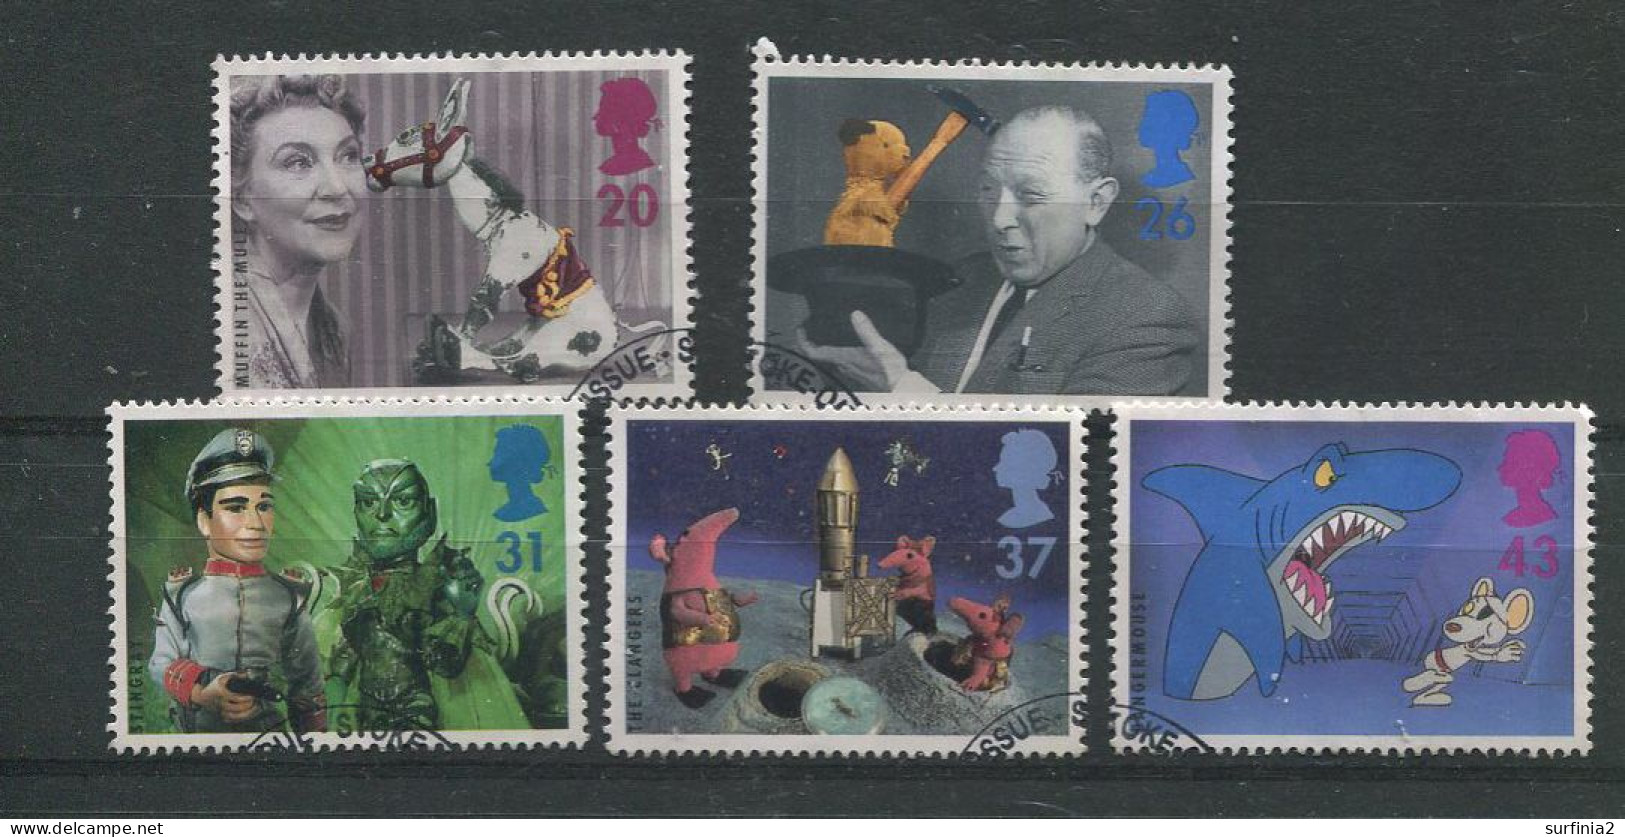 STAMPS - 1996 CHILDREN'S TELEVISION SET VFU - Used Stamps